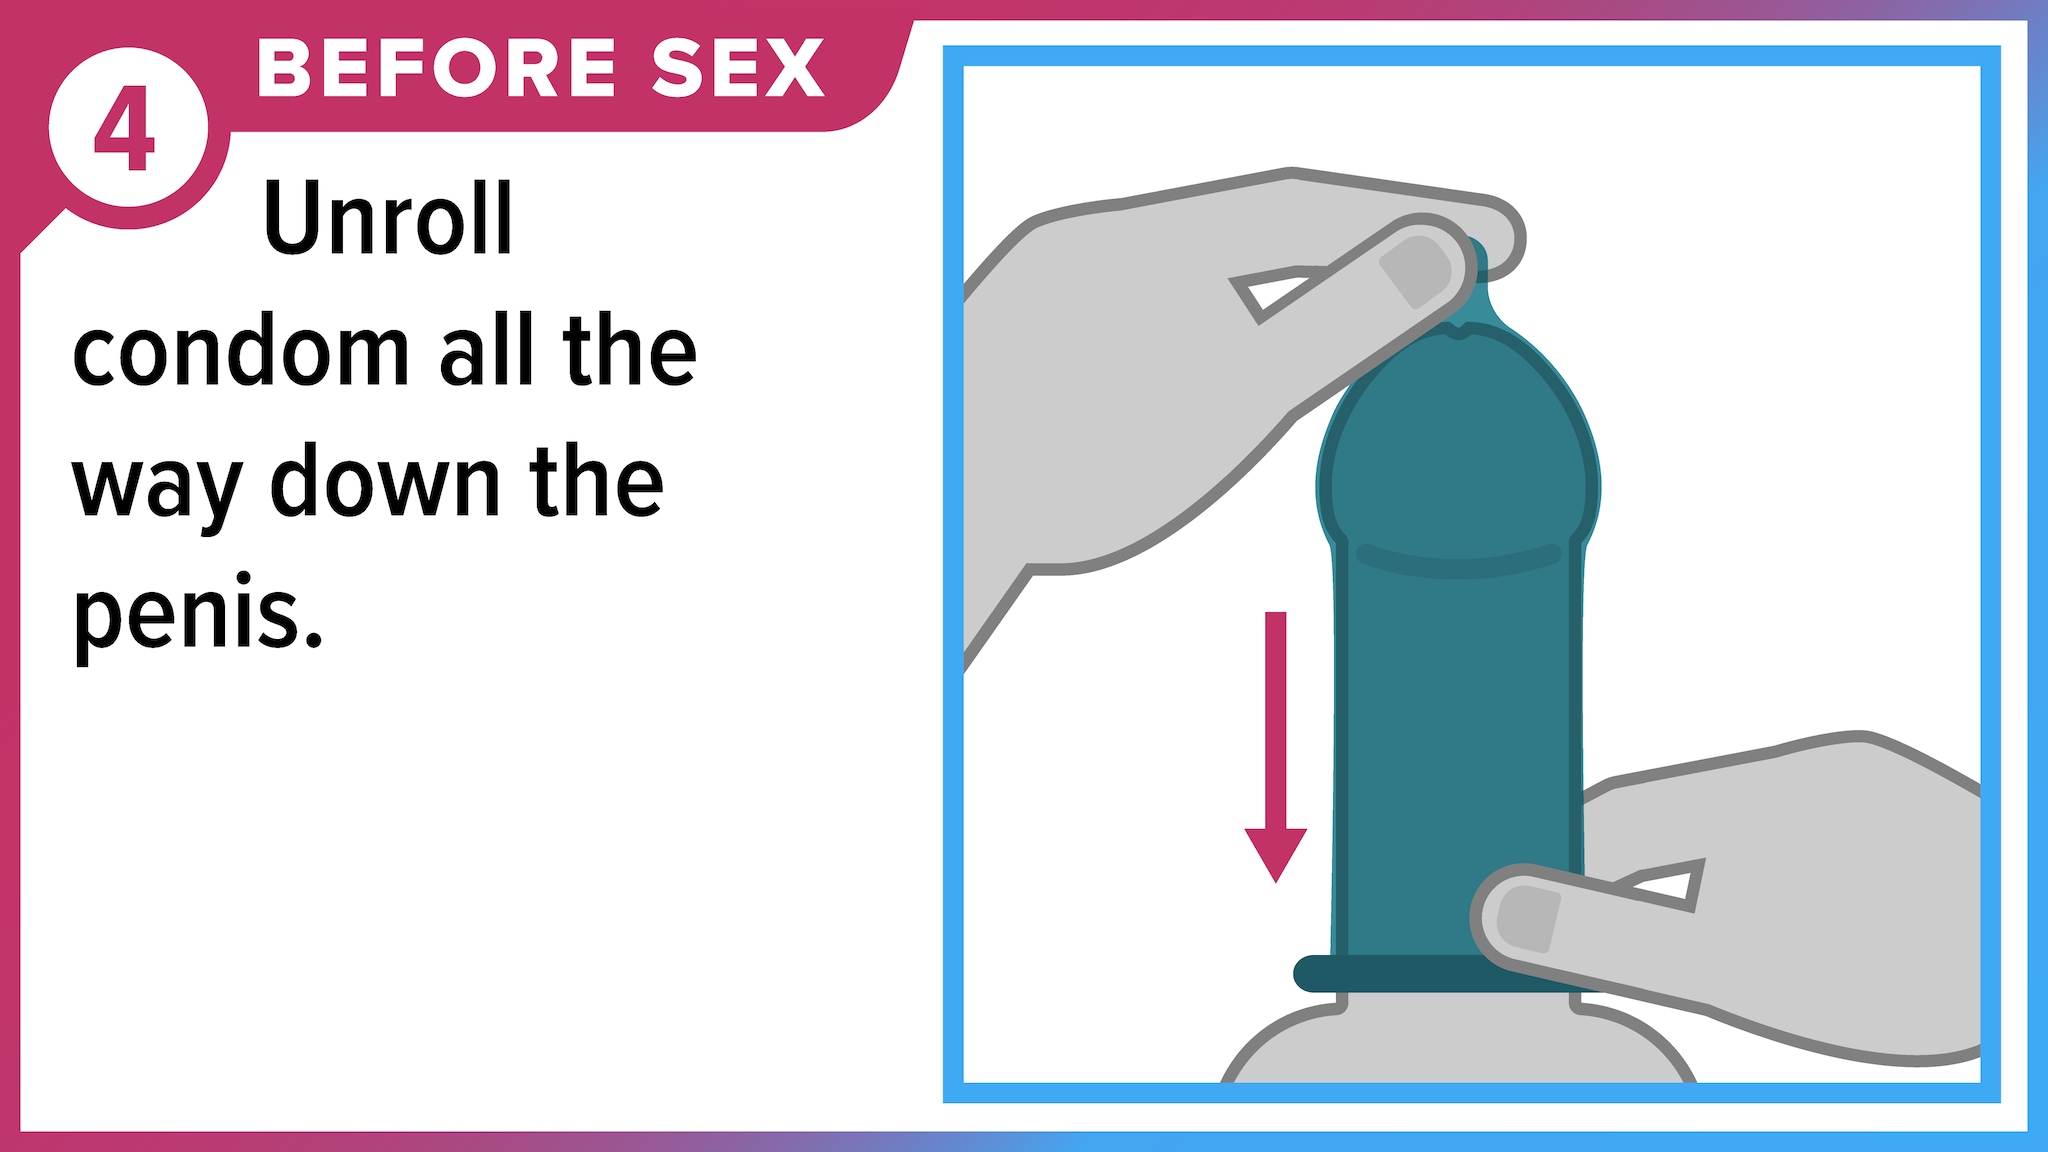 Hand rolling condom down the penis. Before sex, unroll condom all the way down the penis.